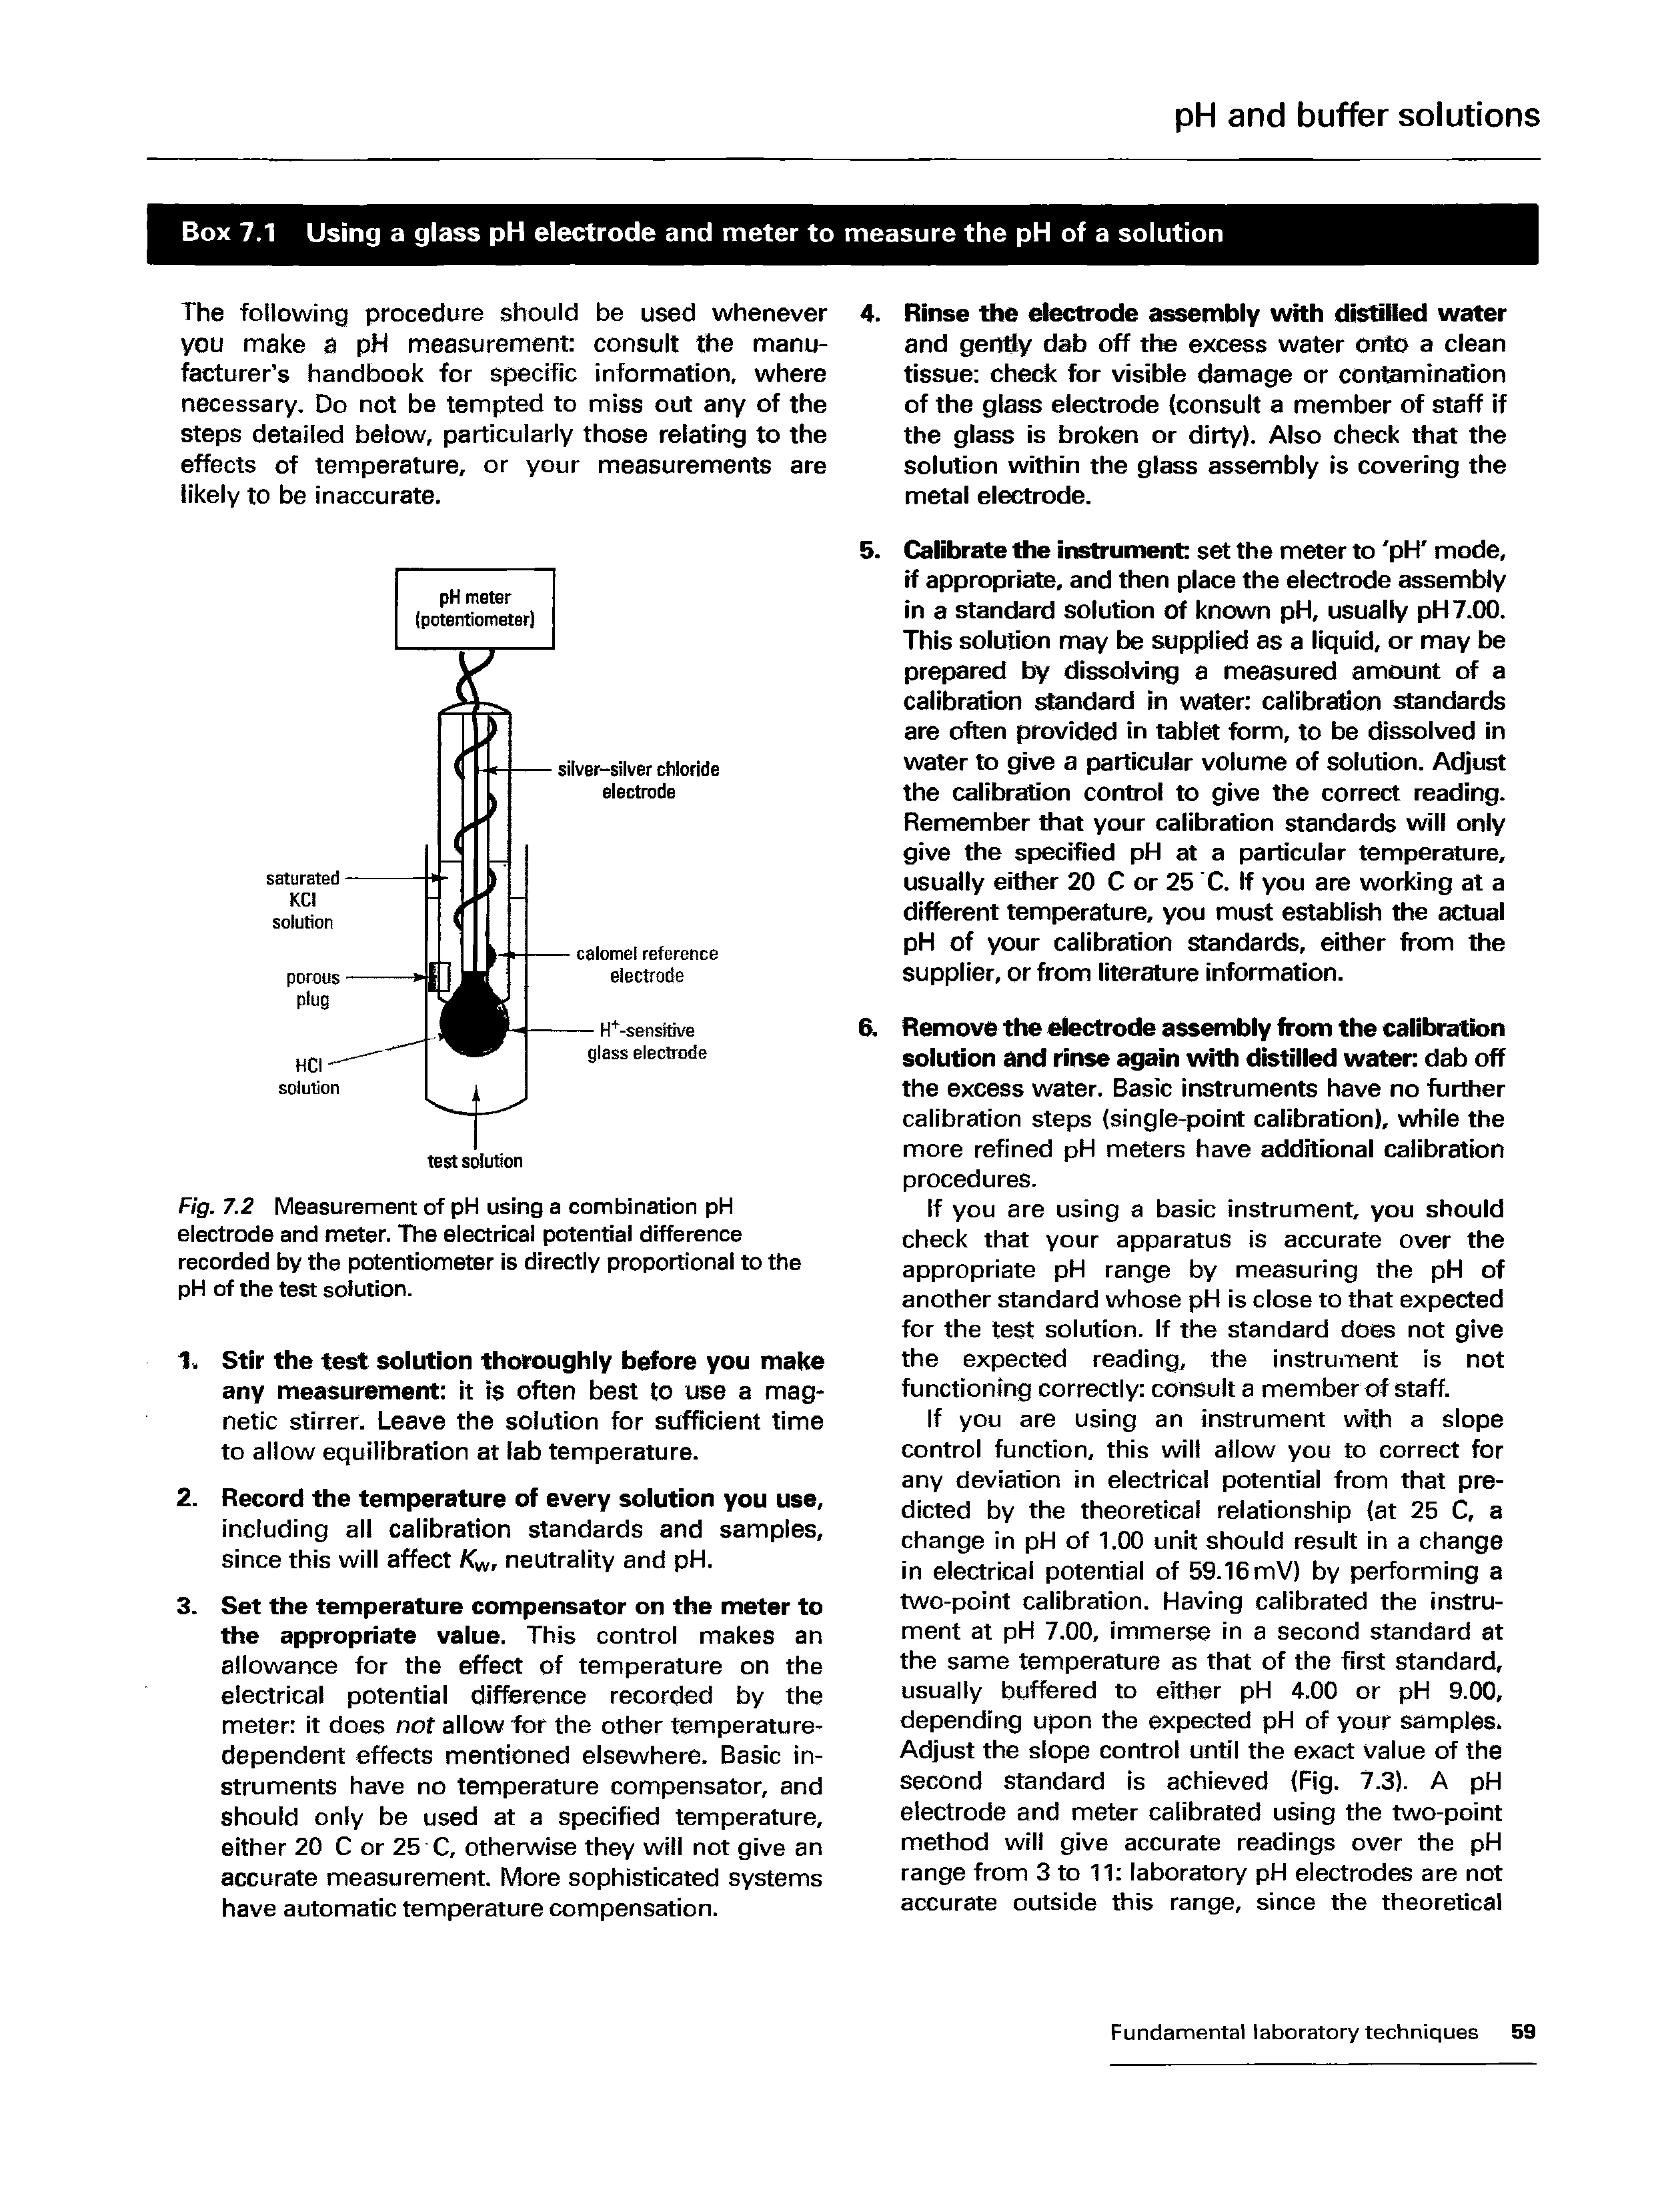 Fig. 7.2 Measurement of pH using a combination pH electrode and meter. The electrical potential difference recorded by the potentiometer is directly proportional to the pH of the test solution.